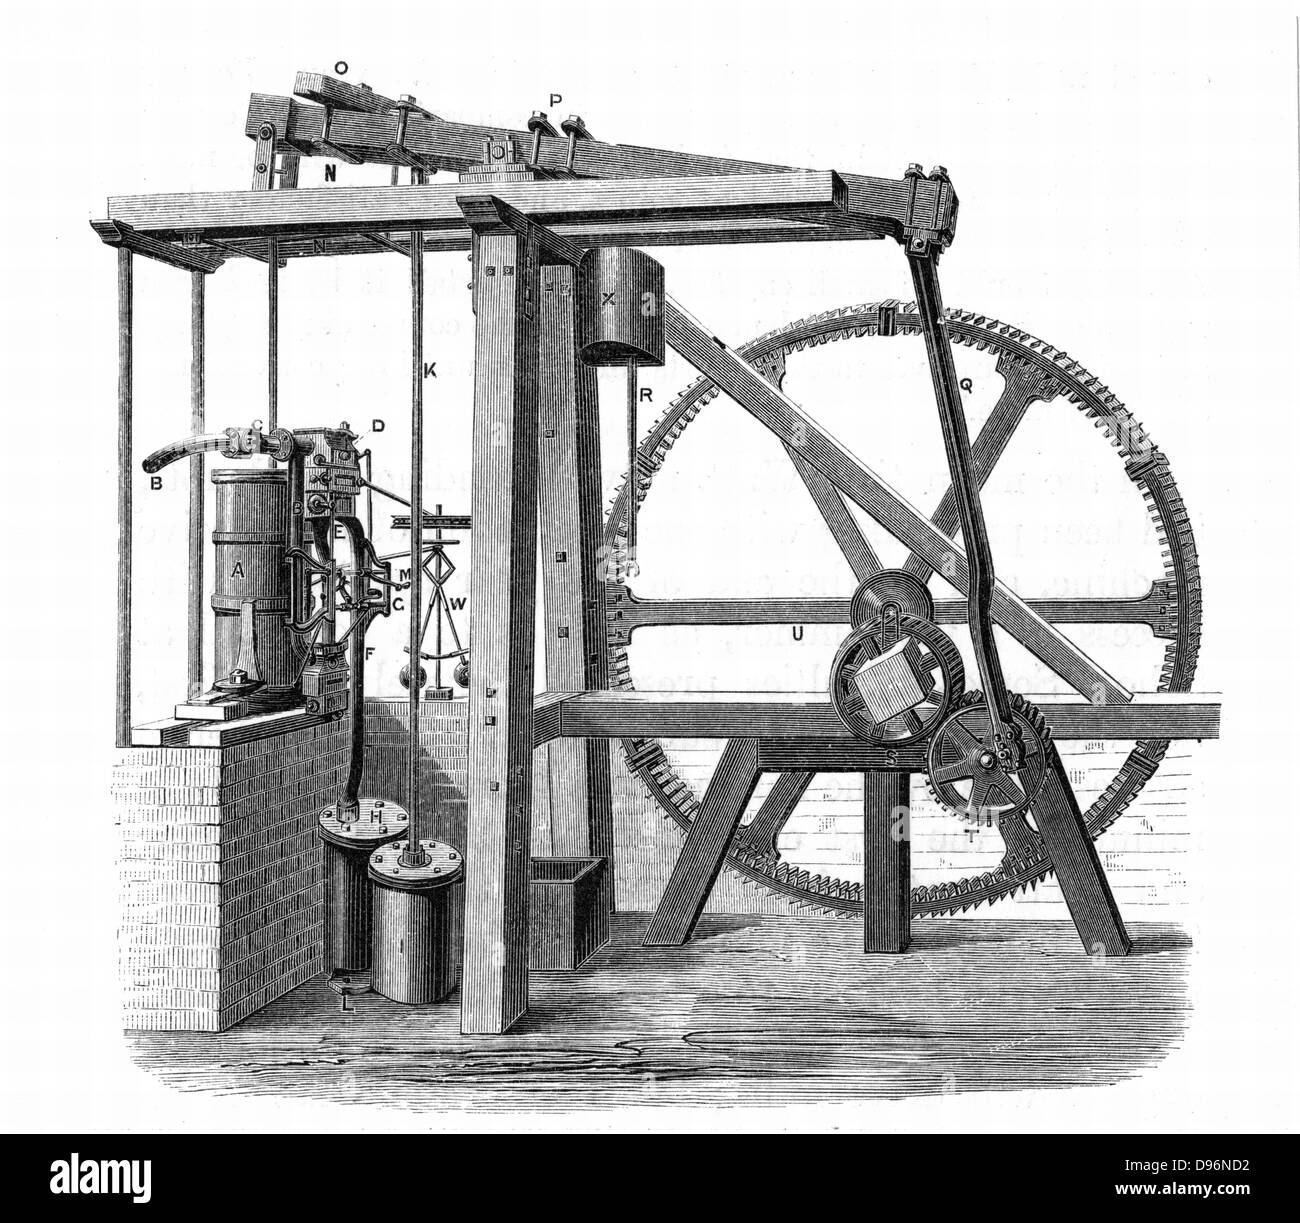 James Watt's (1736-1819) prototype steam engine 'Old Bess' c1778.  In this engine, which was erected at the Soho works, Birmingham, England, in 1777-1778,  reciprocating motion was turned into rotary motion by a sun-and-planet gear train. From 'Lives of Boulton and Watt', Samuel Smiles, (London, 1861). Engraving. Stock Photo